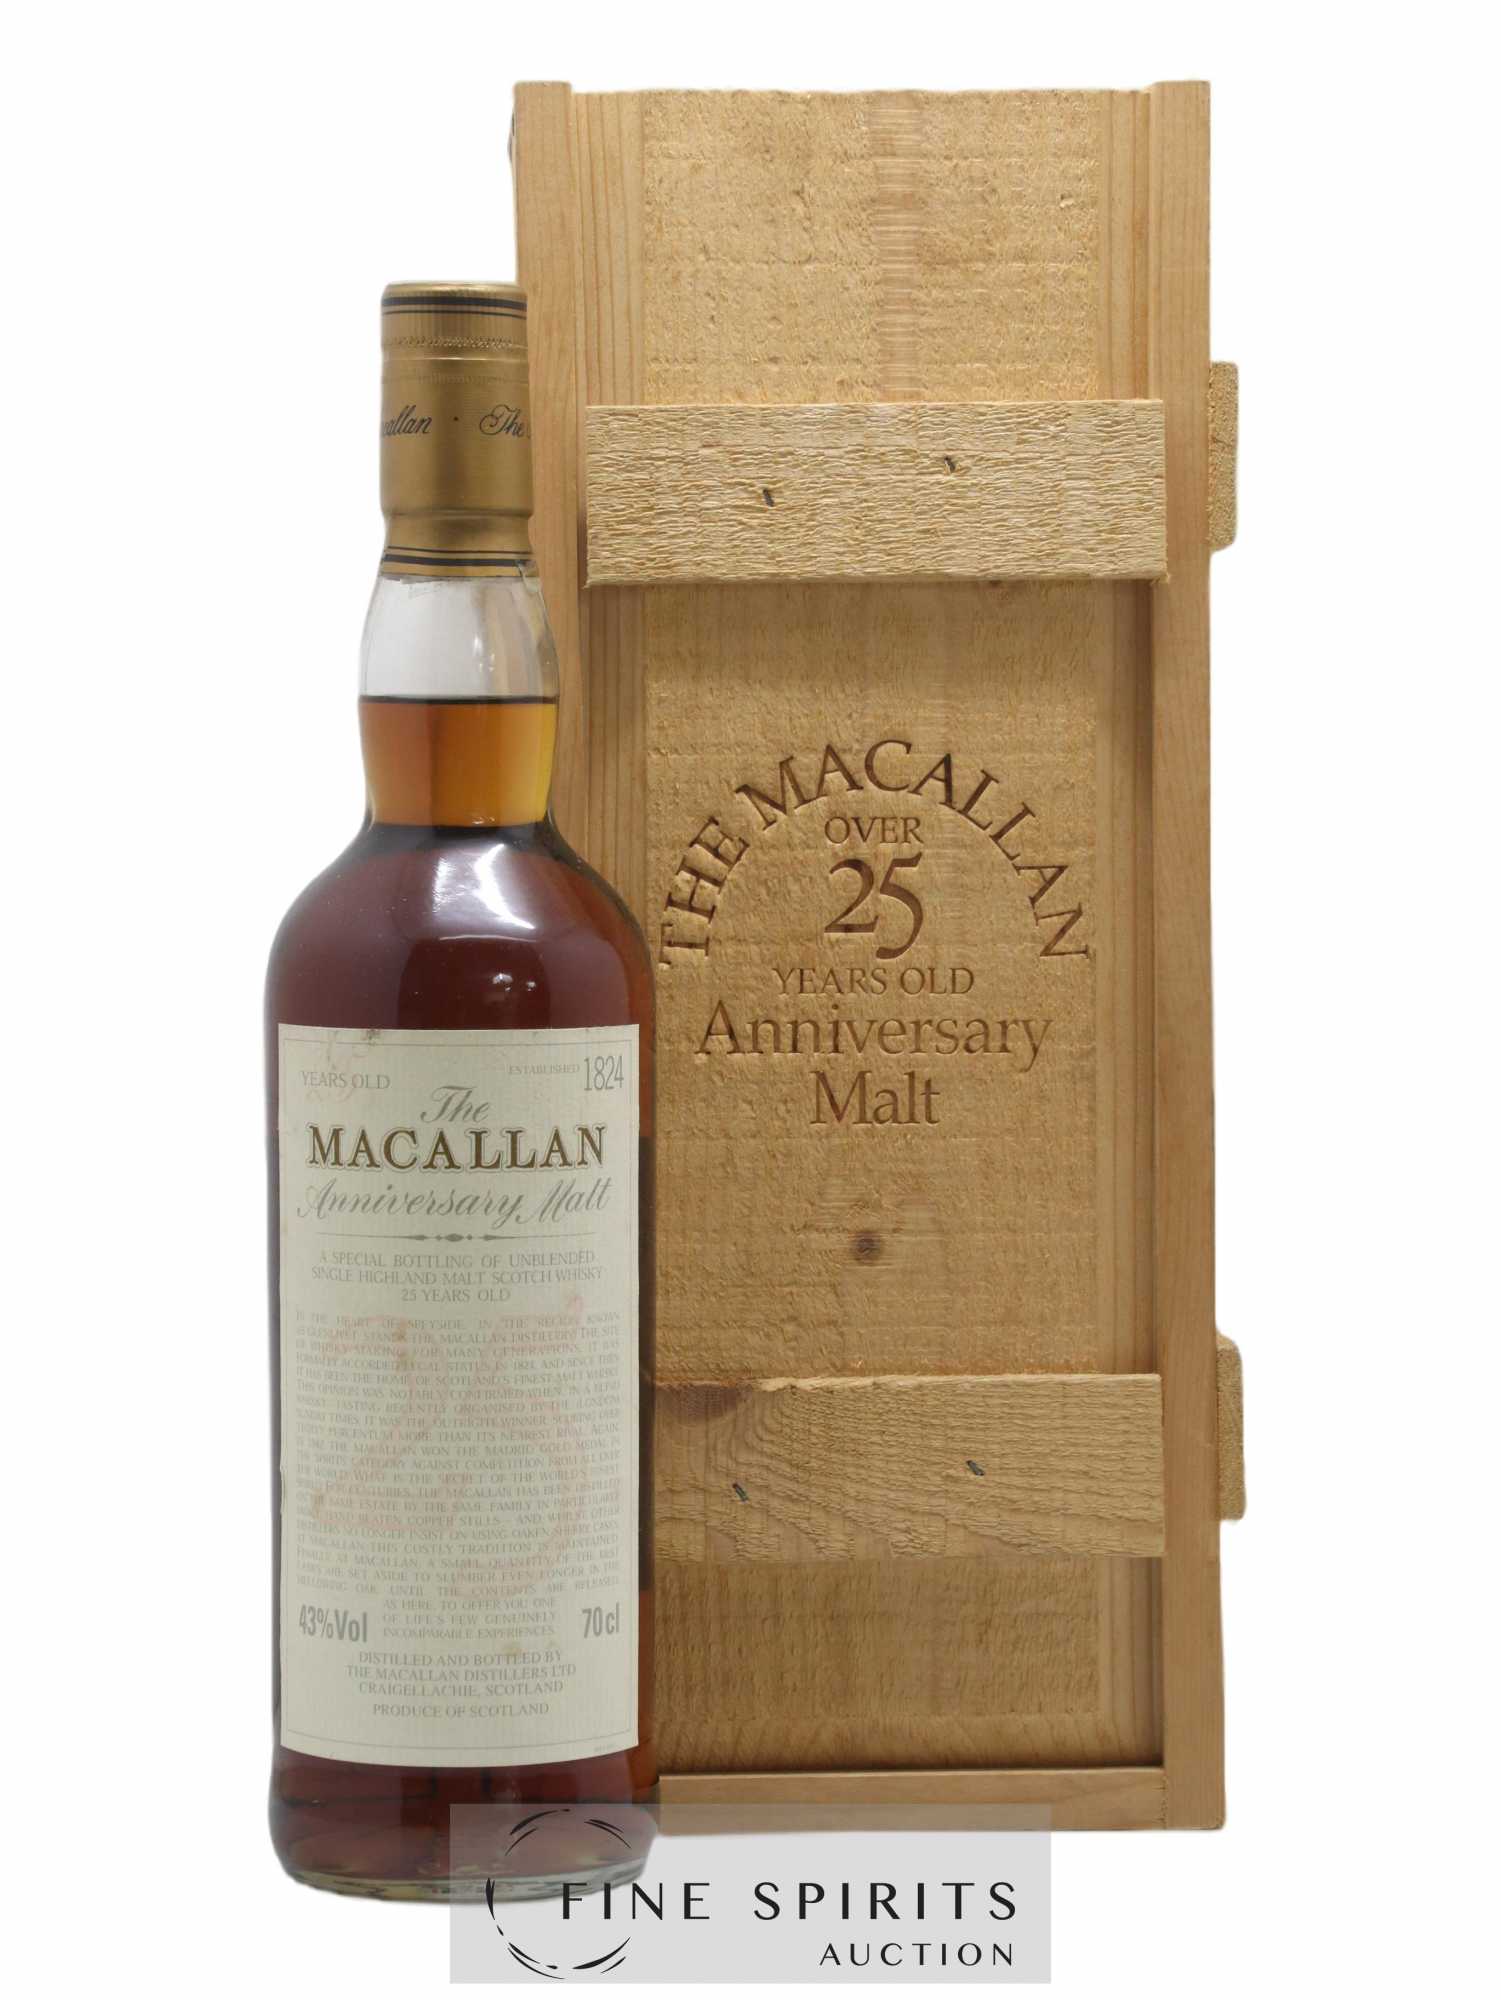 Macallan (The) 25 years Of. Anniversary Malt Special Bottling (70cl.)